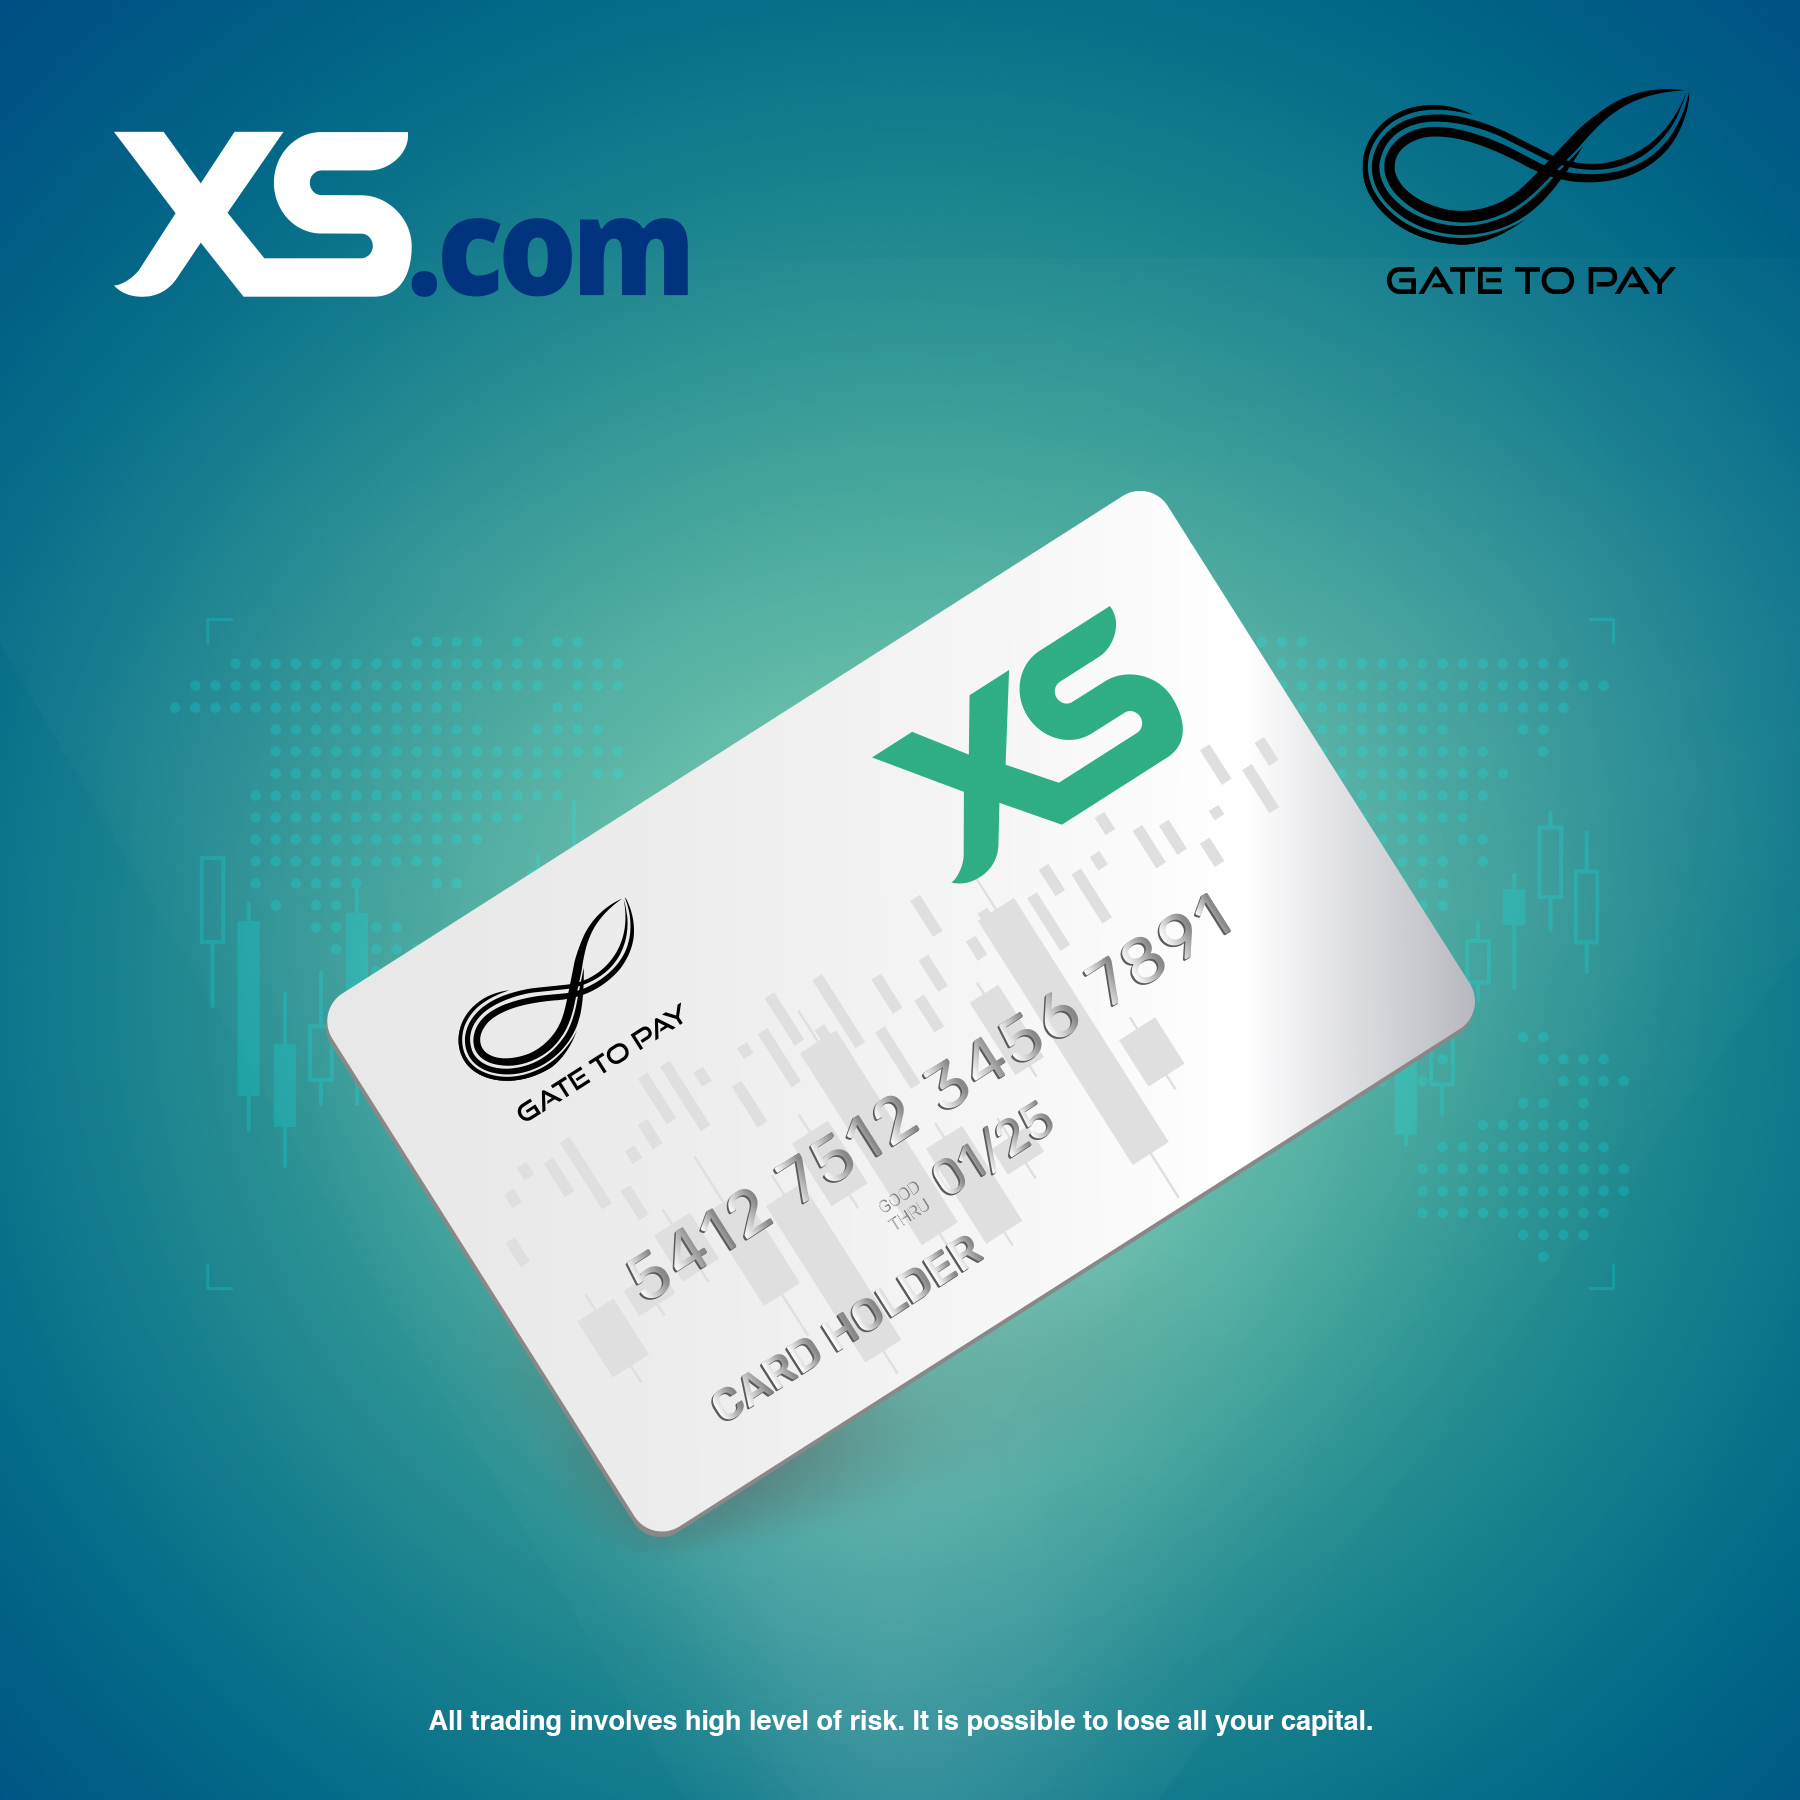 XS.com Introduces XS Prepaid Mastercard Integrated with “XS Cards” Mobile App